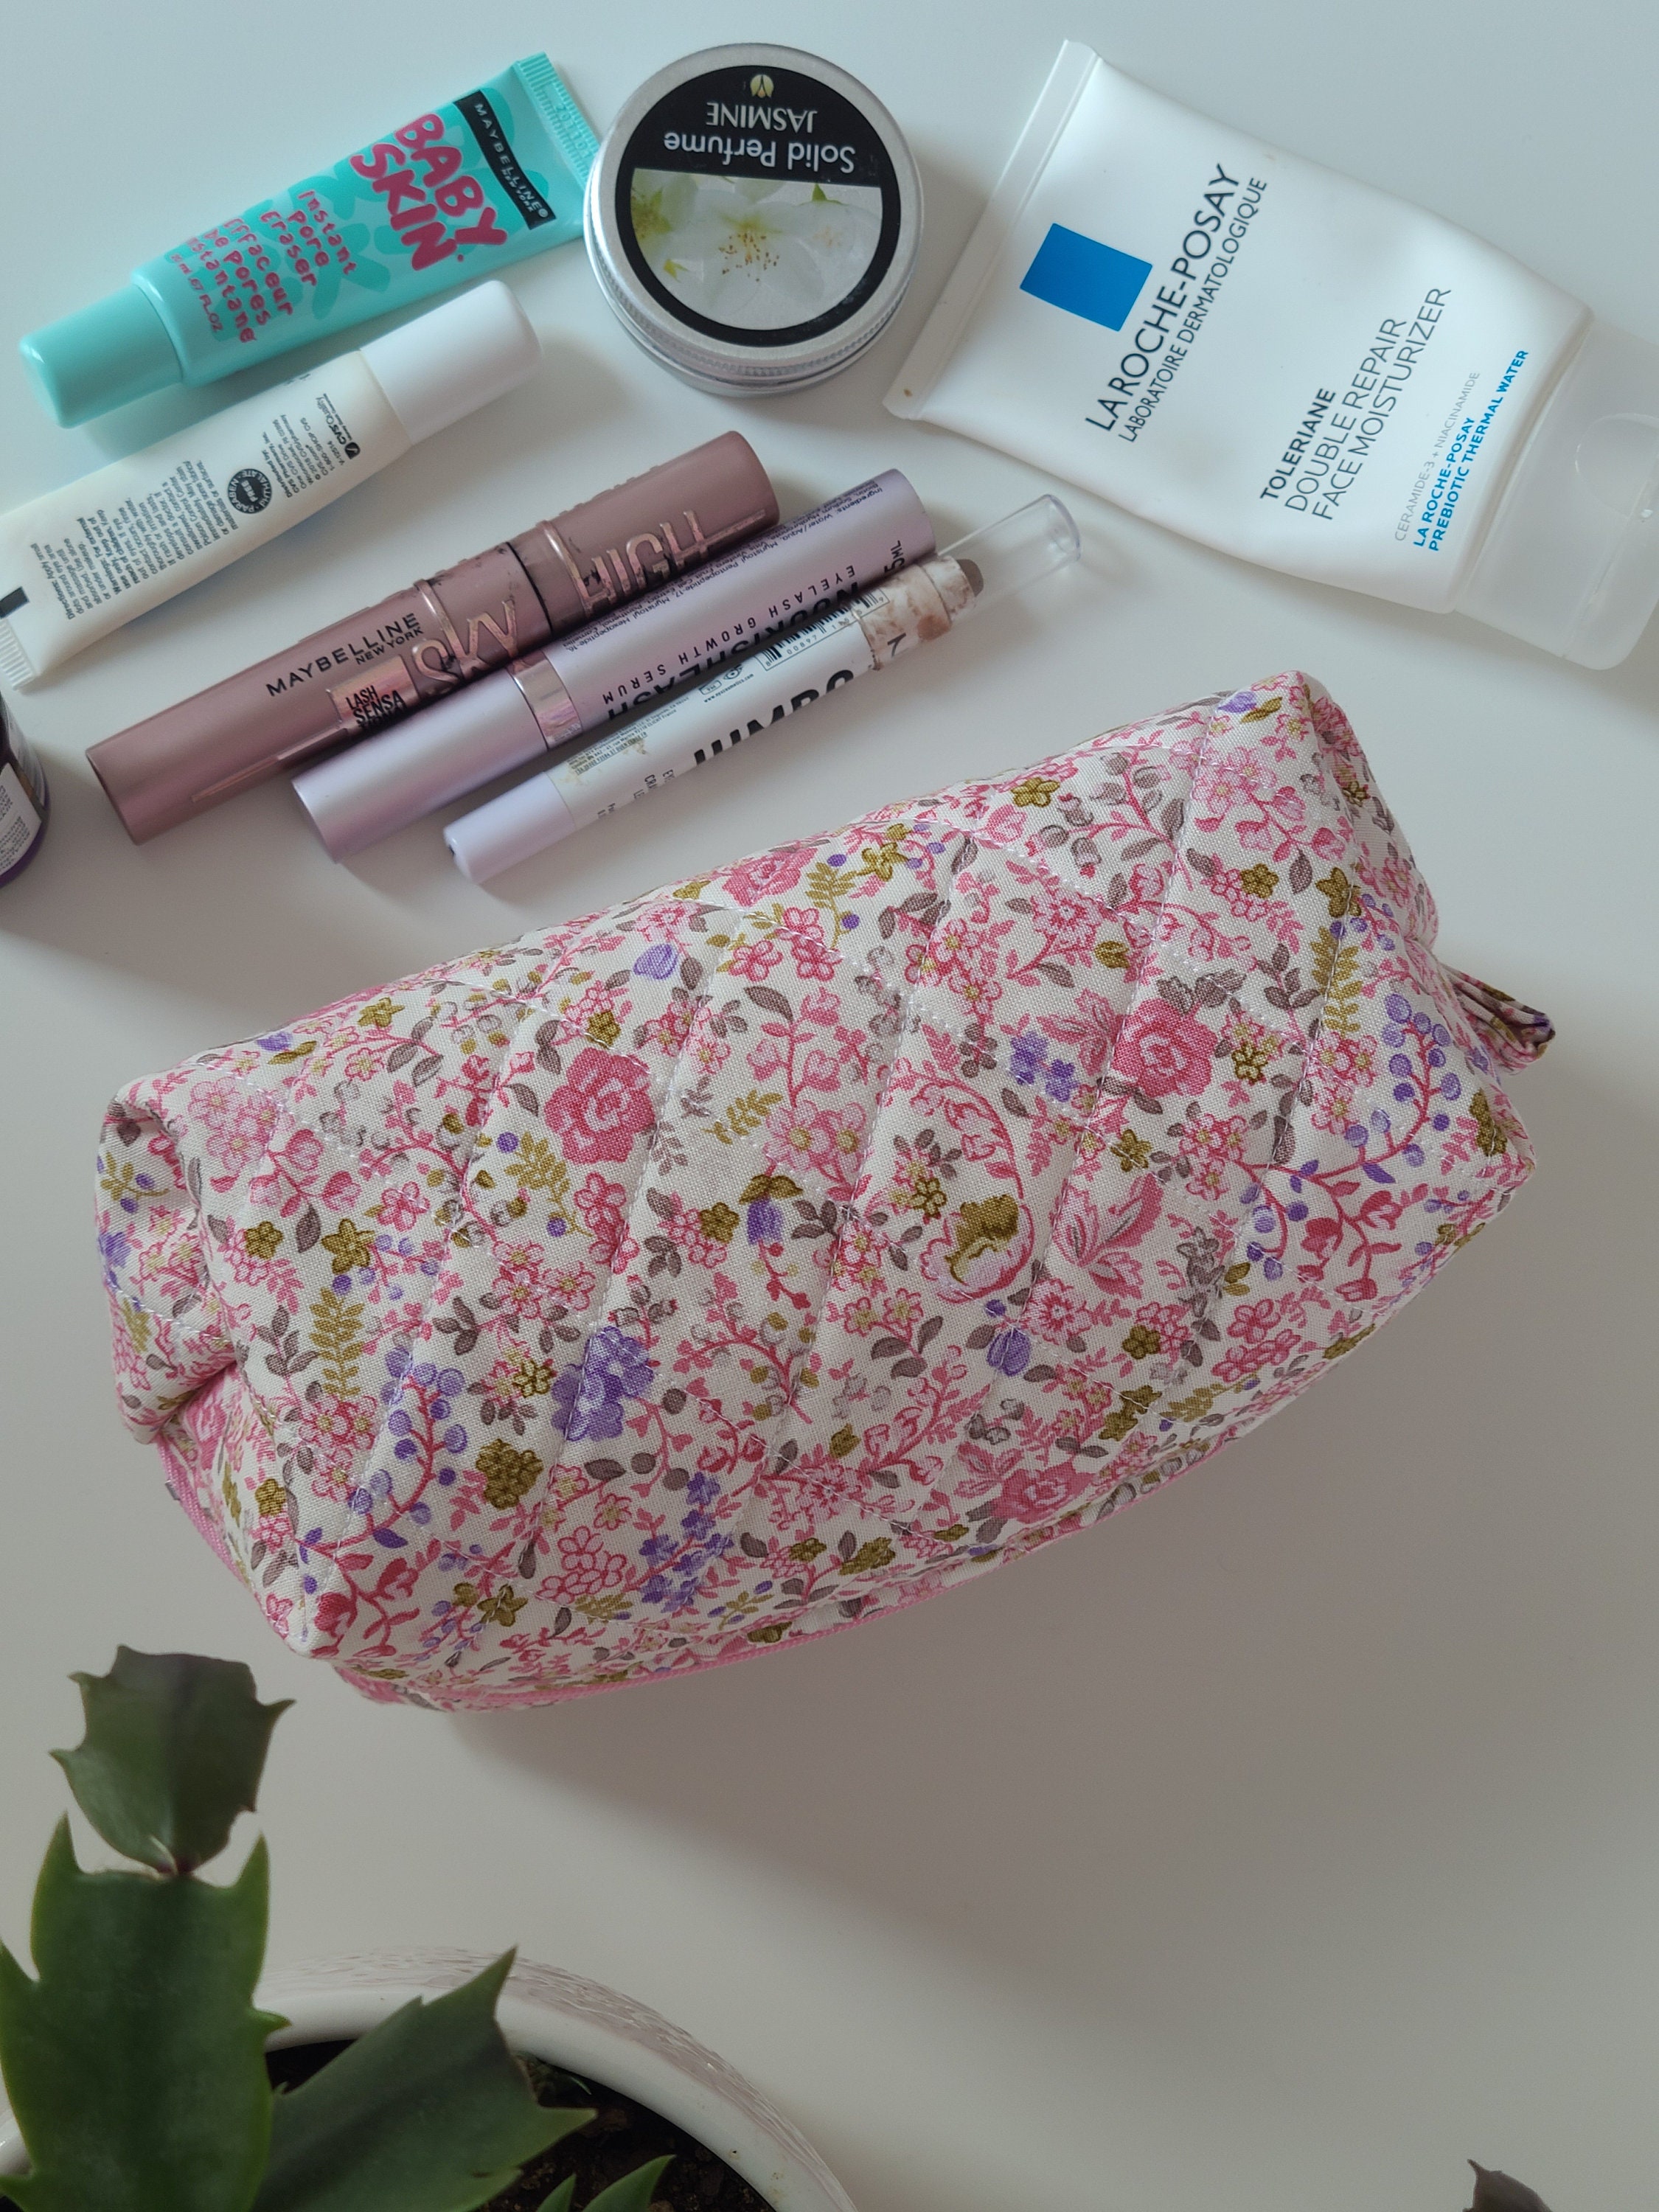 Pink Sweetheart Square Quilted Puffy Plush Cosmetic Multifunction Makeup Bag, Size: 7, Blue